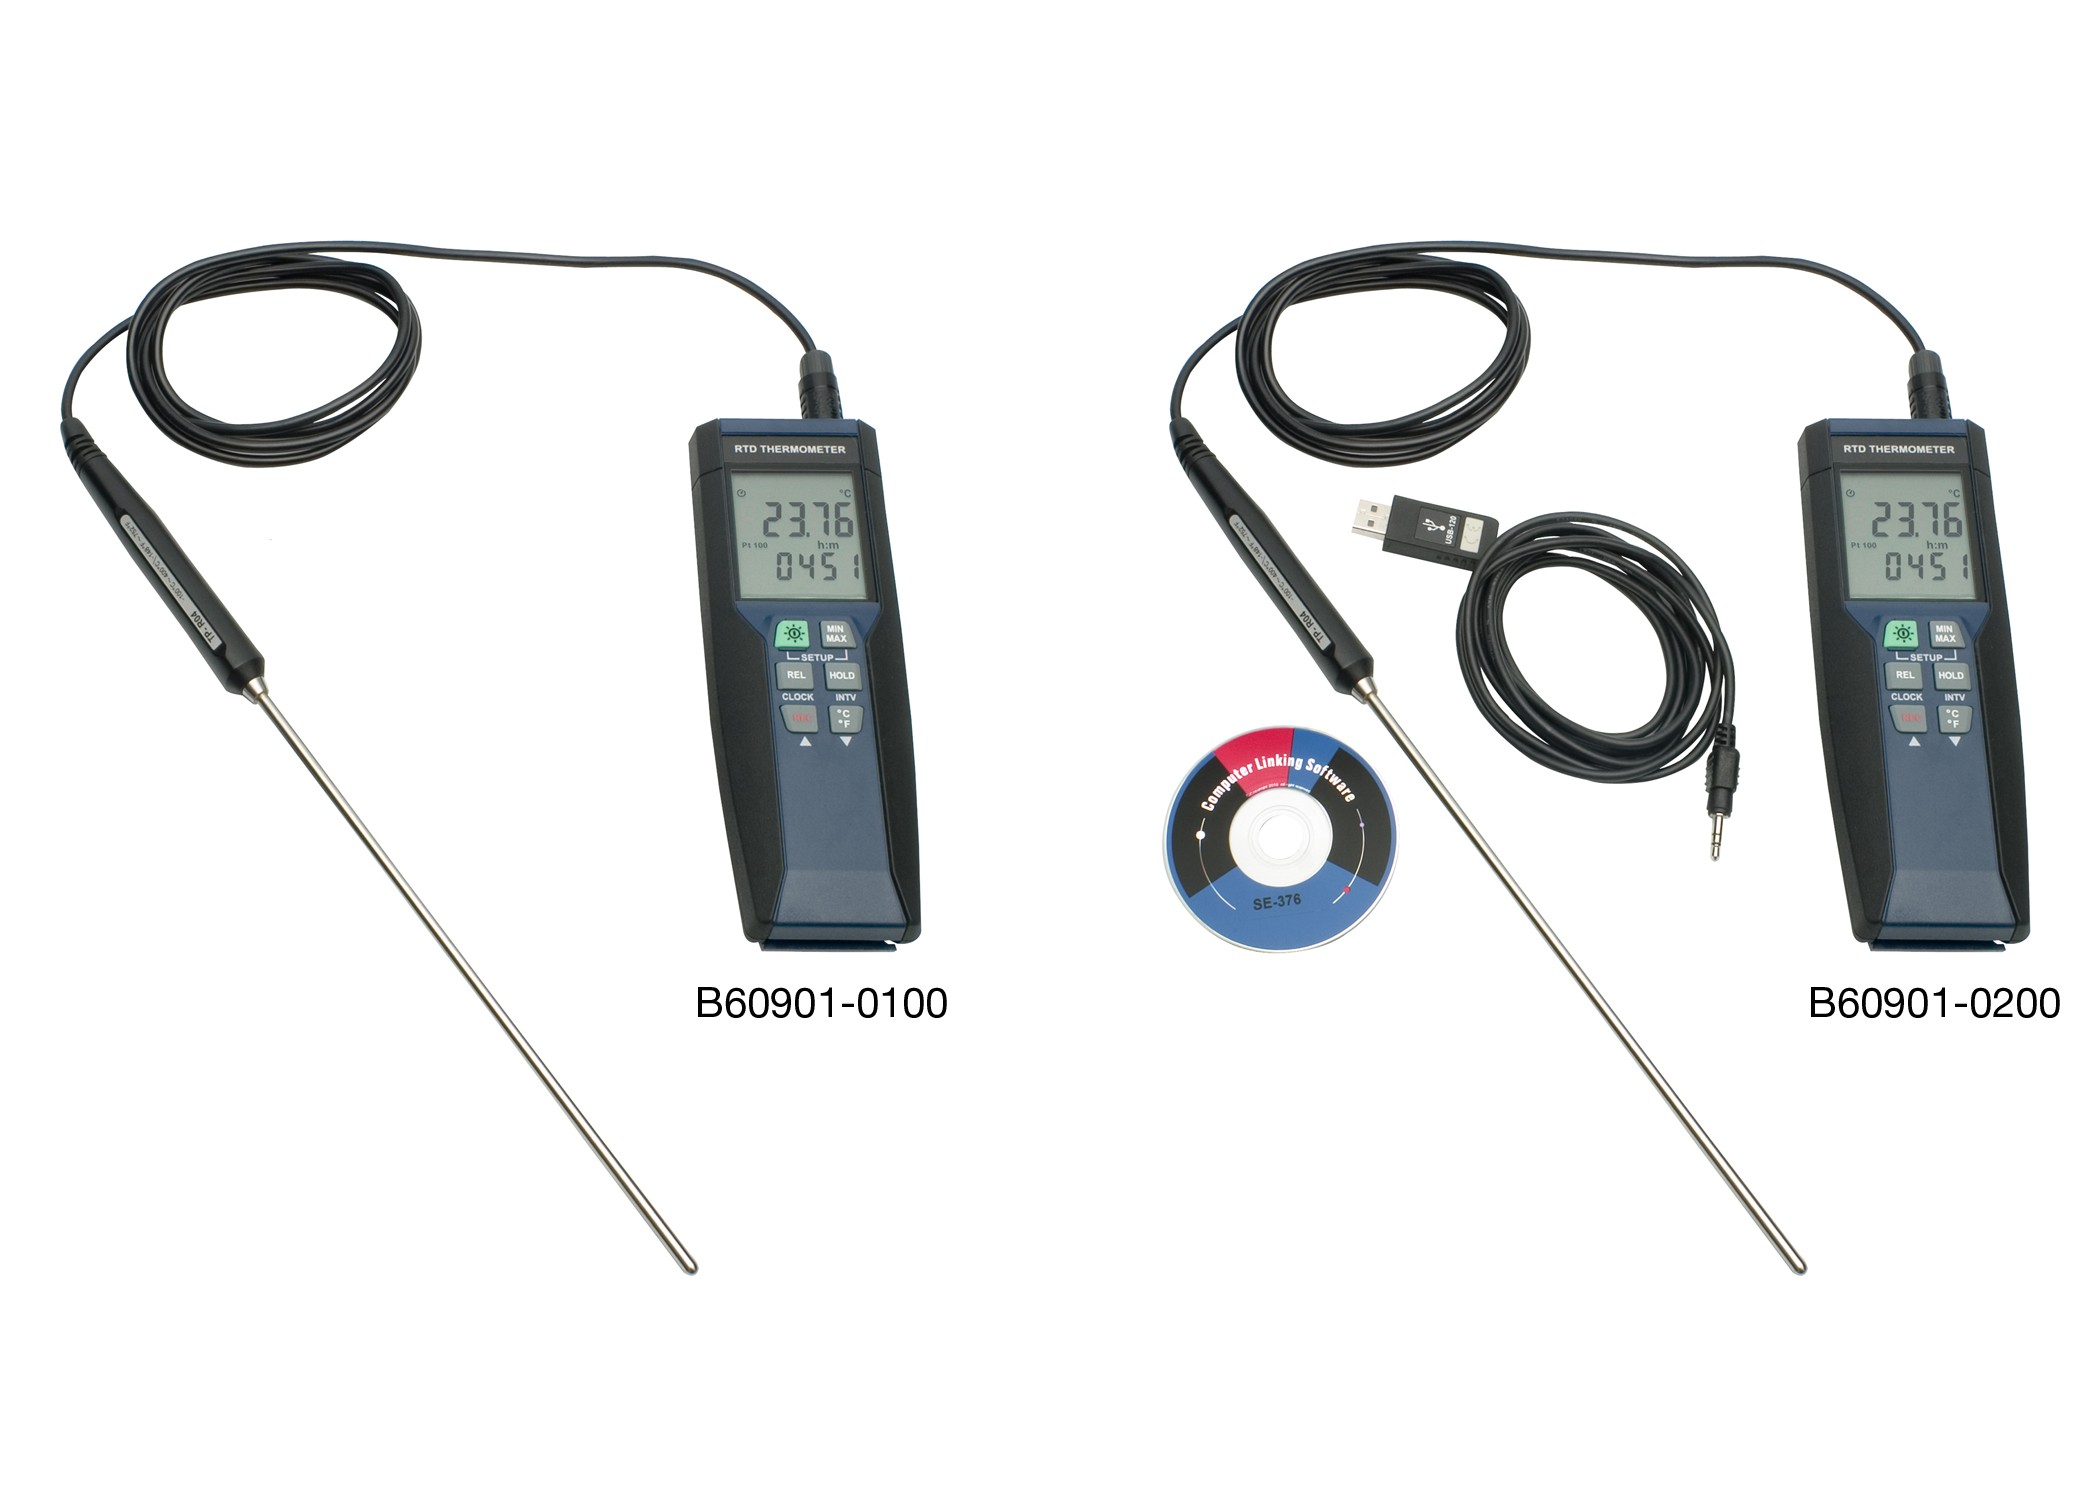 Pyrex thermometer probe instructions